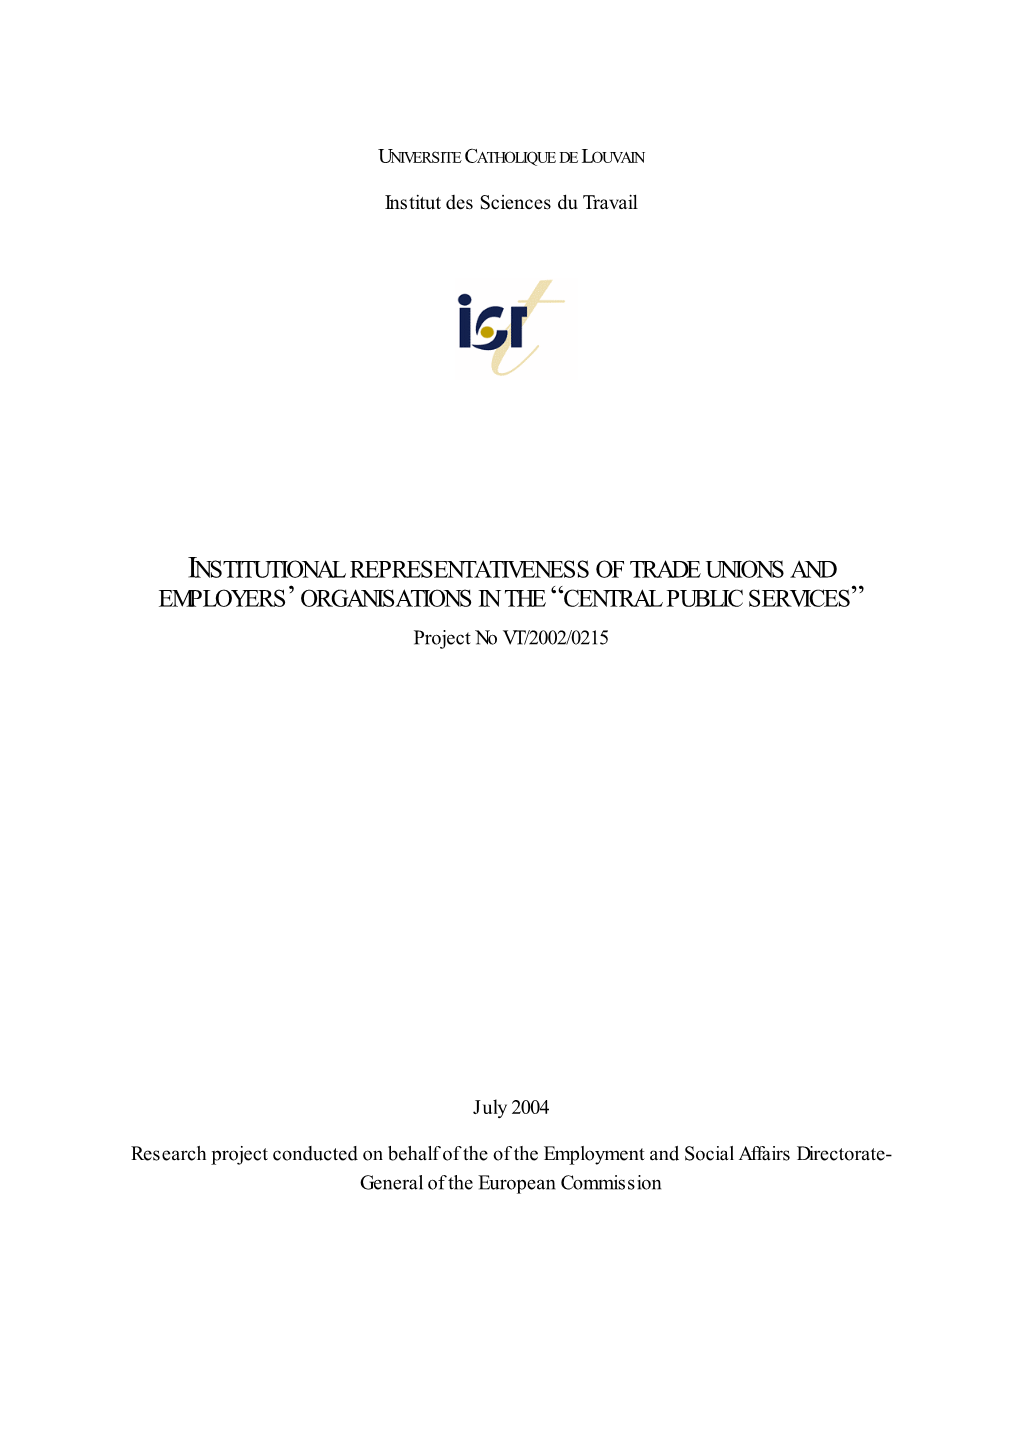 INSTITUTIONAL REPRESENTATIVENESS of TRADE UNIONS and EMPLOYERS’ ORGANISATIONS in the “CENTRAL PUBLIC SERVICES” Project No VT/2002/0215